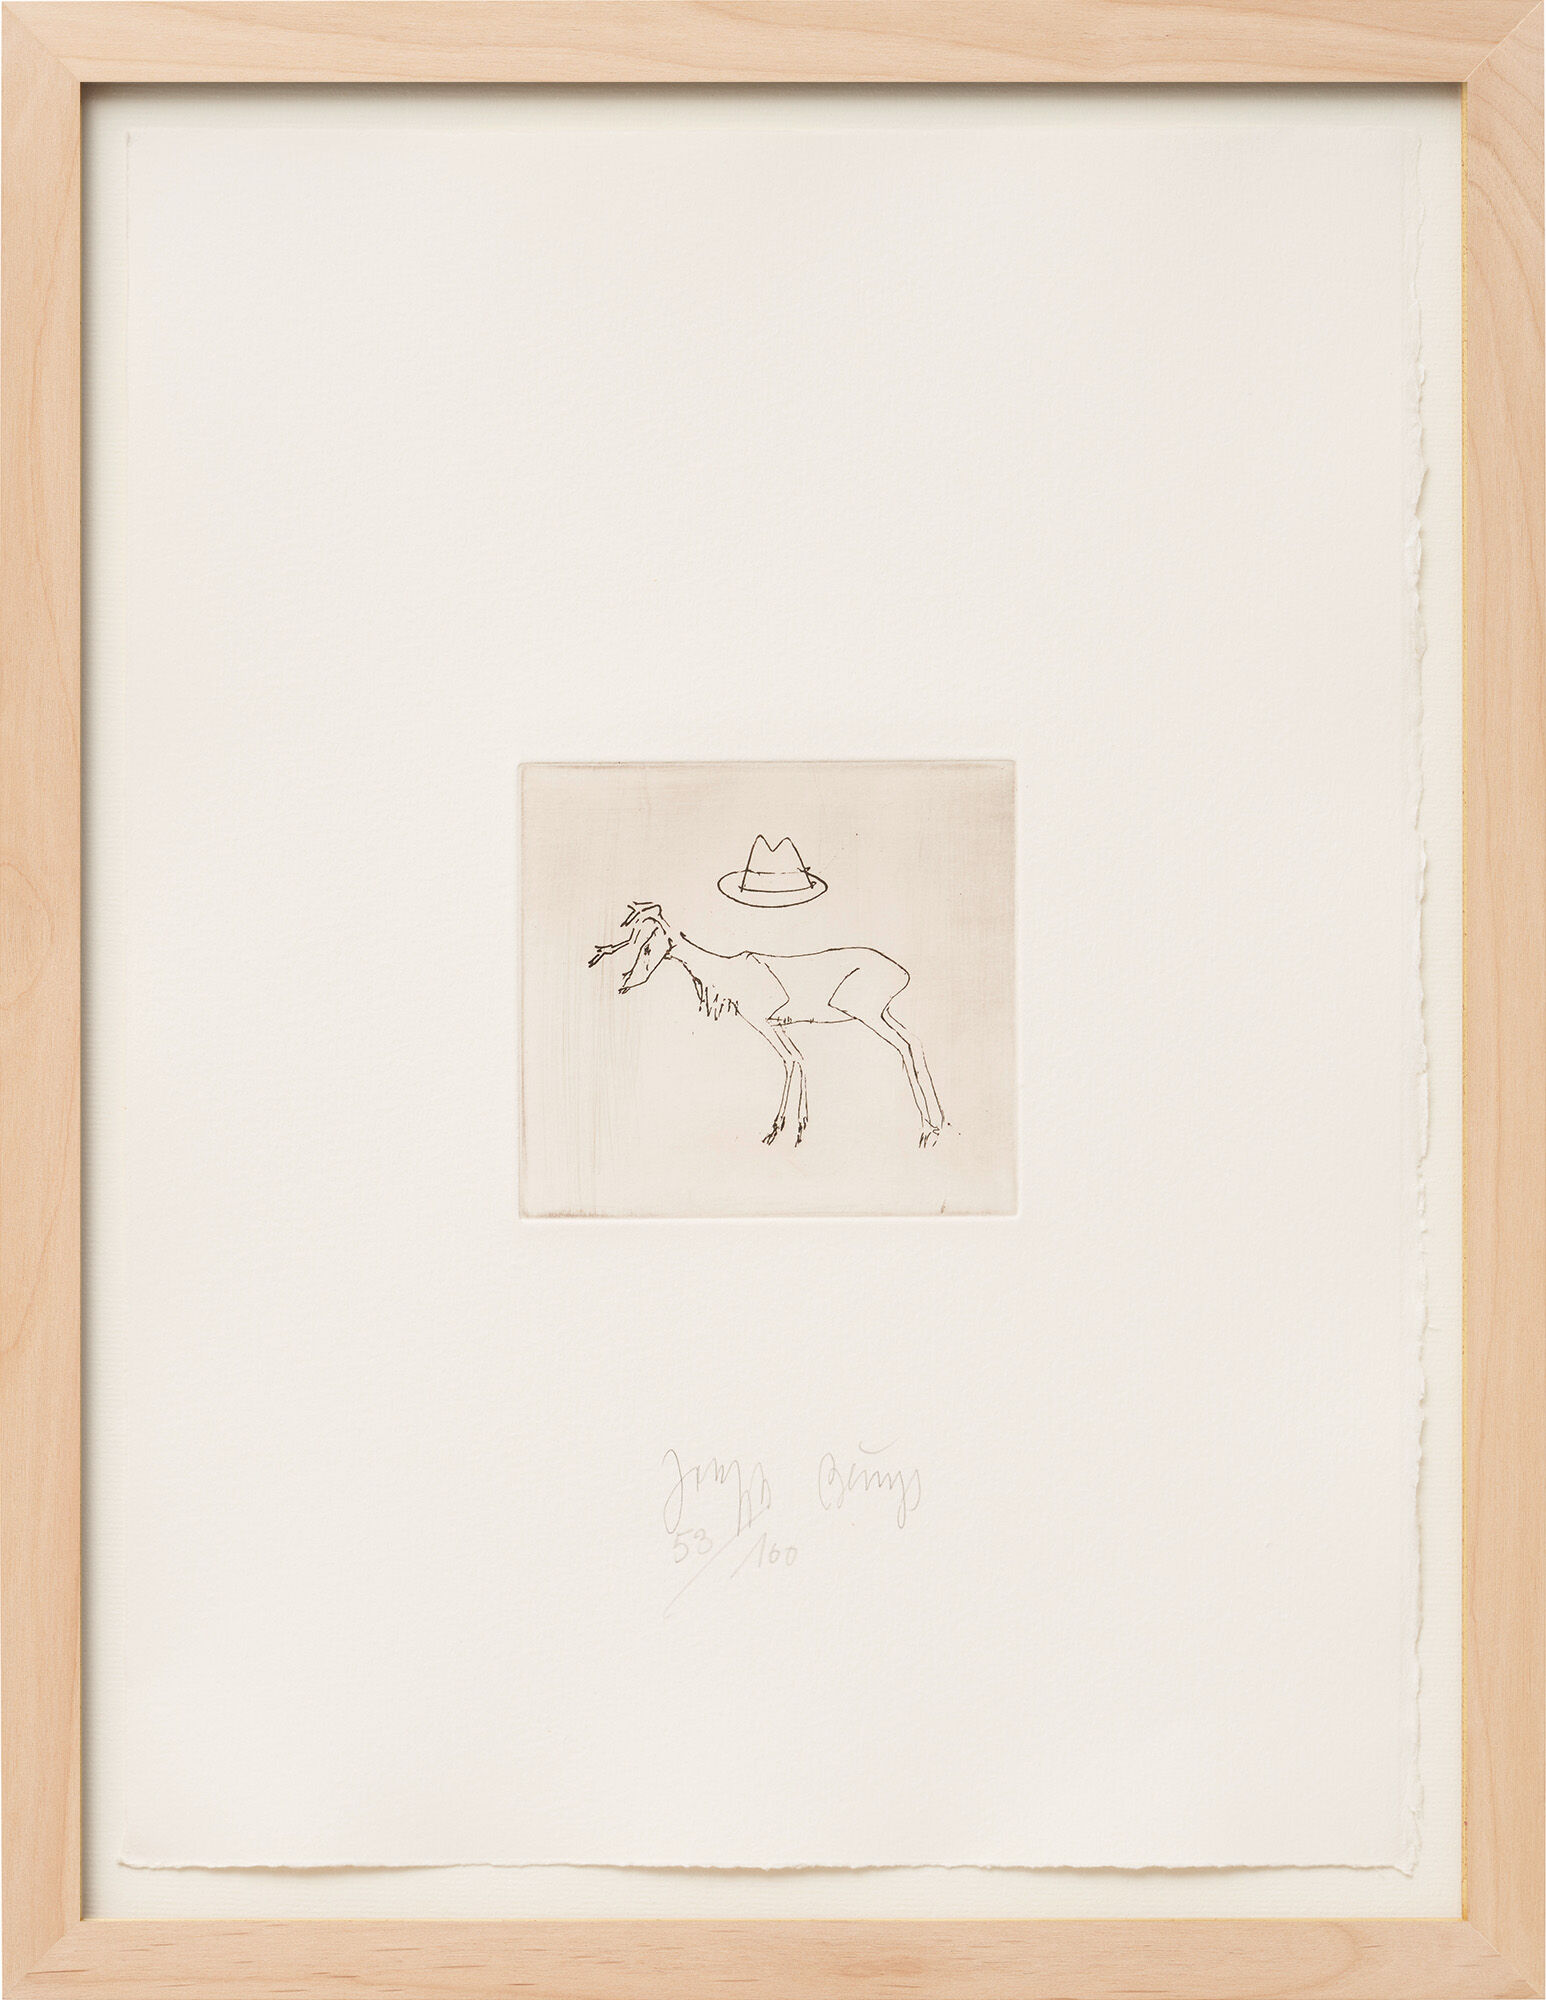 Picture "Stag and Hat" (1980/82) by Joseph Beuys